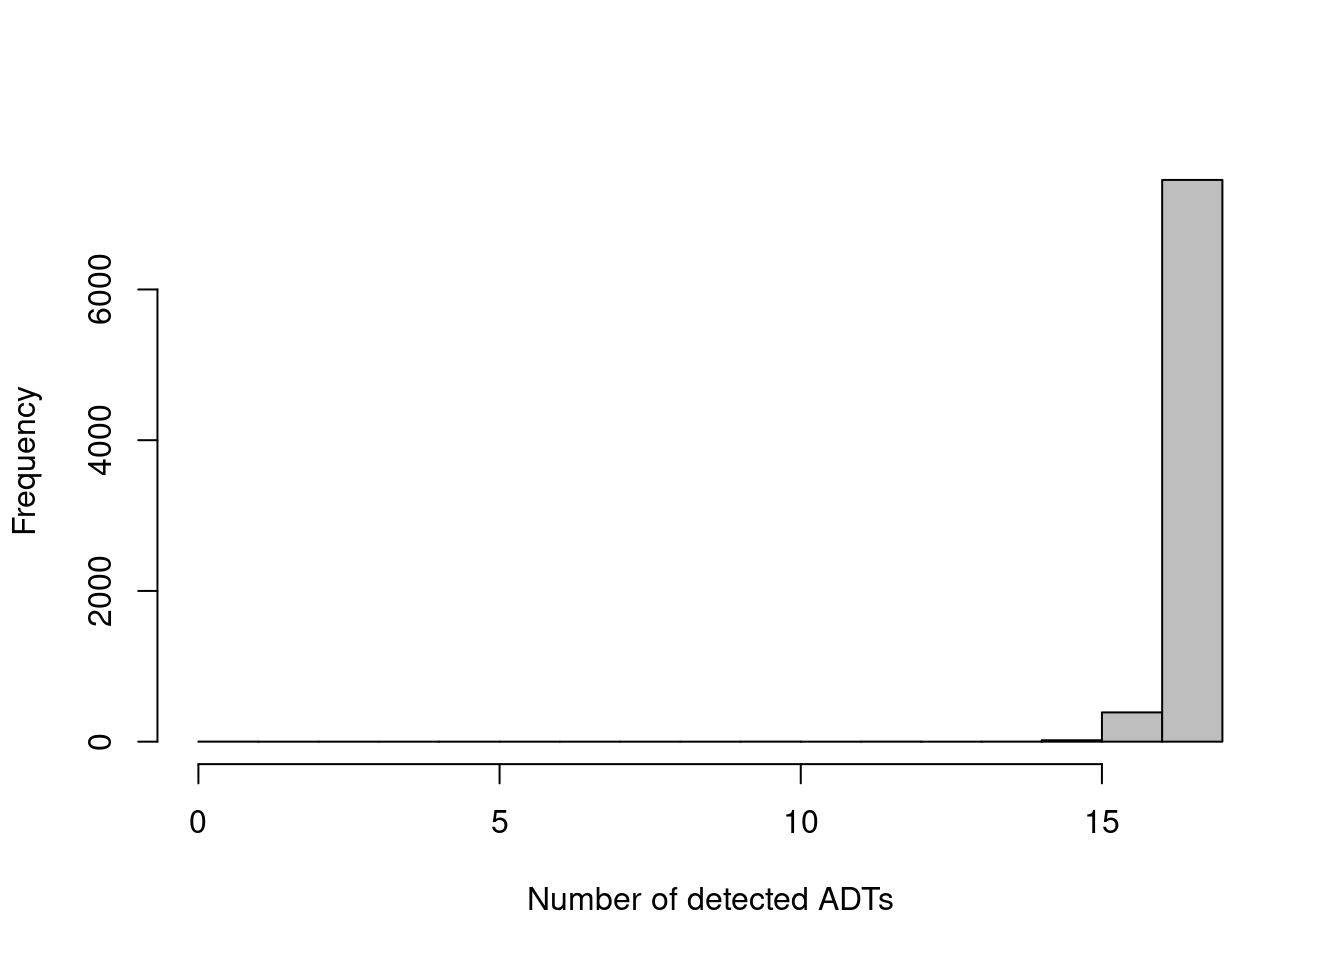 Distribution of the number of detected ADTs across all cells in the PBMC dataset.